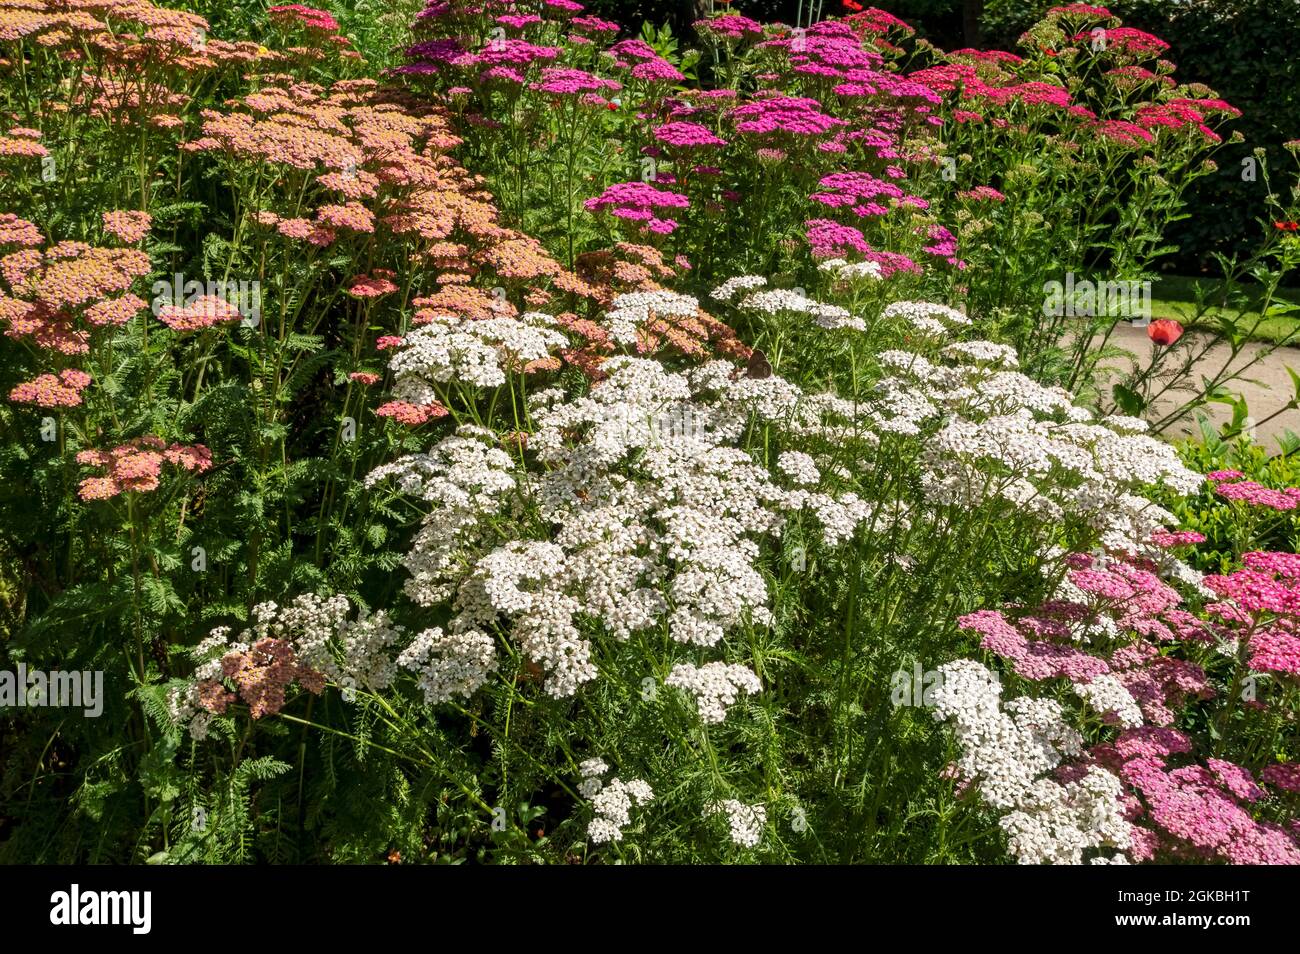 Pink and white achillea plants growing yarrow flowers flowering in a garden border flowerbed in summer England UK United Kingdom GB Great Britain Stock Photo